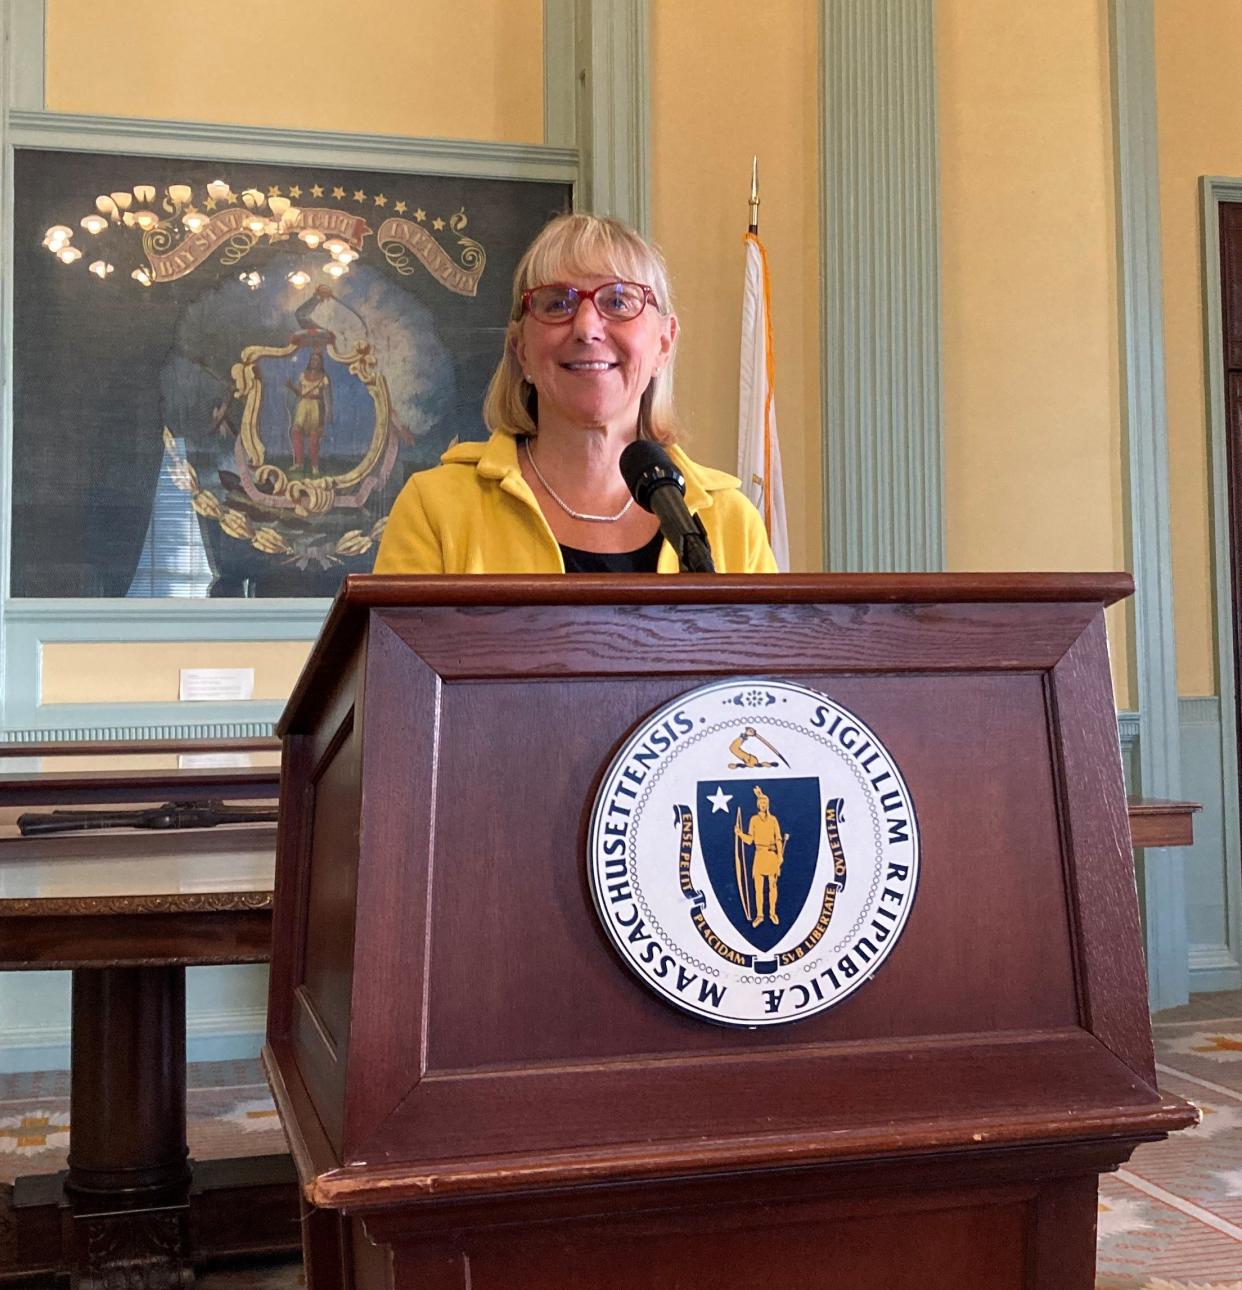 Senate President Karen Spilka, D-Ashland, announces the unanimous passage of a bill to make feminine hygiene products available for free in selected publicly supported bathrooms on Thursday.